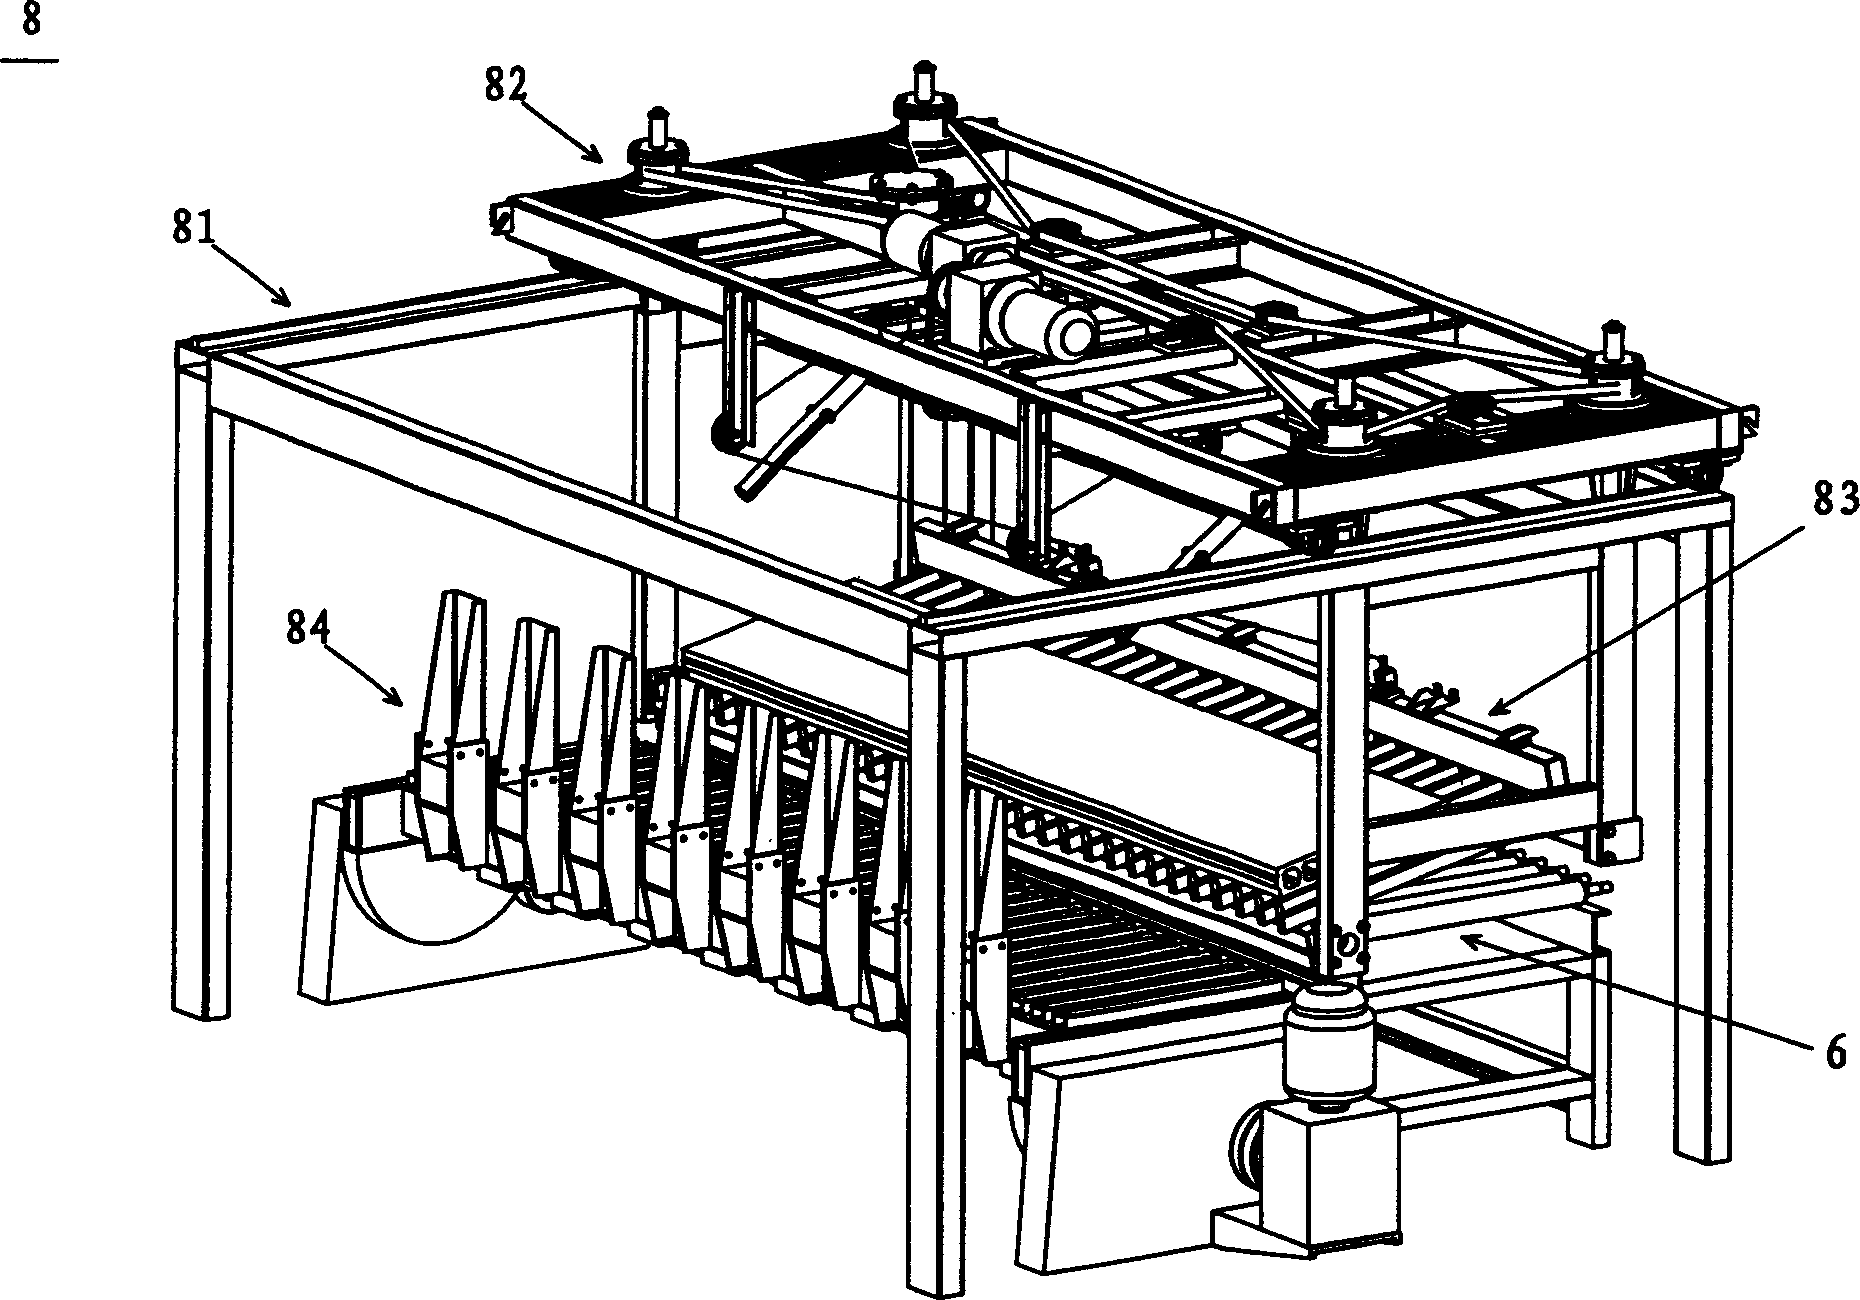 Automatic non-supporting board manufacture and system of light batten